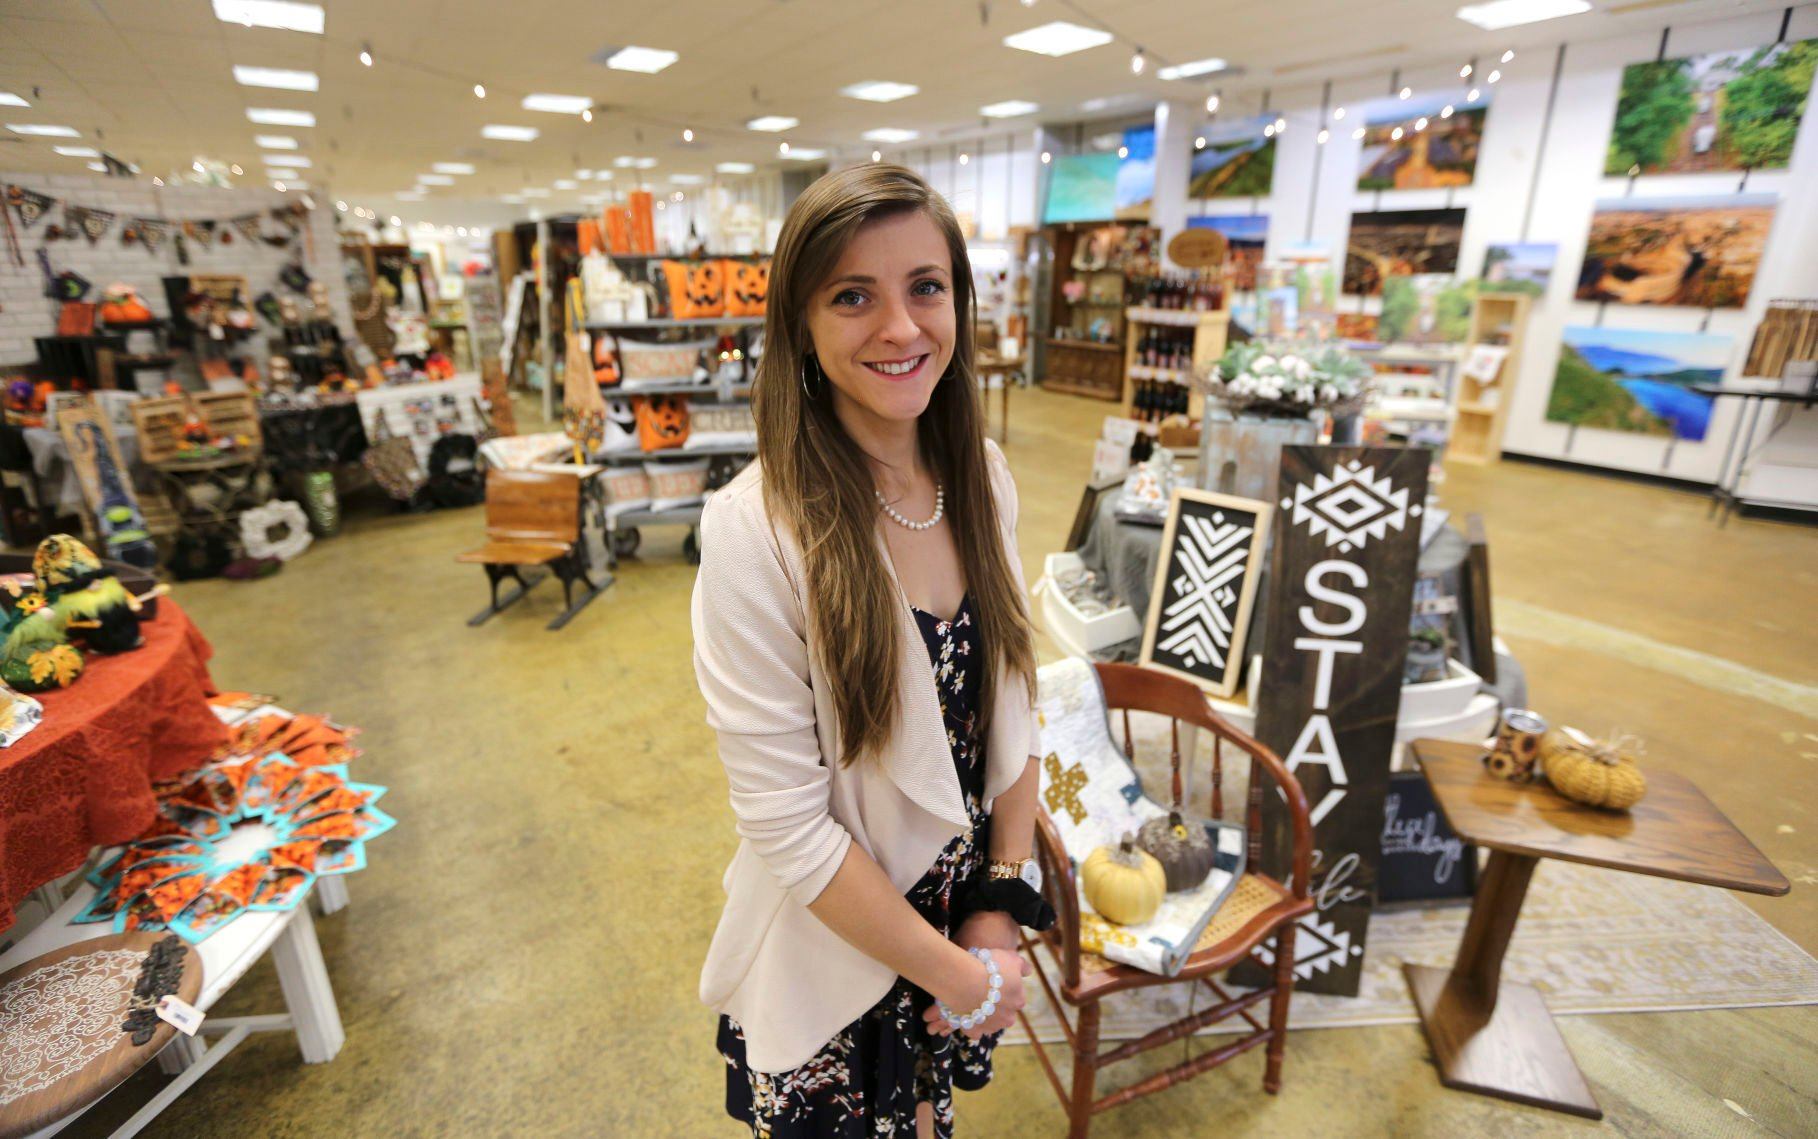 Mercedes Pfab is the owner of Maker’s Market, located in Dubuque’s Kennedy Mall.    PHOTO CREDIT: Dave Kettering